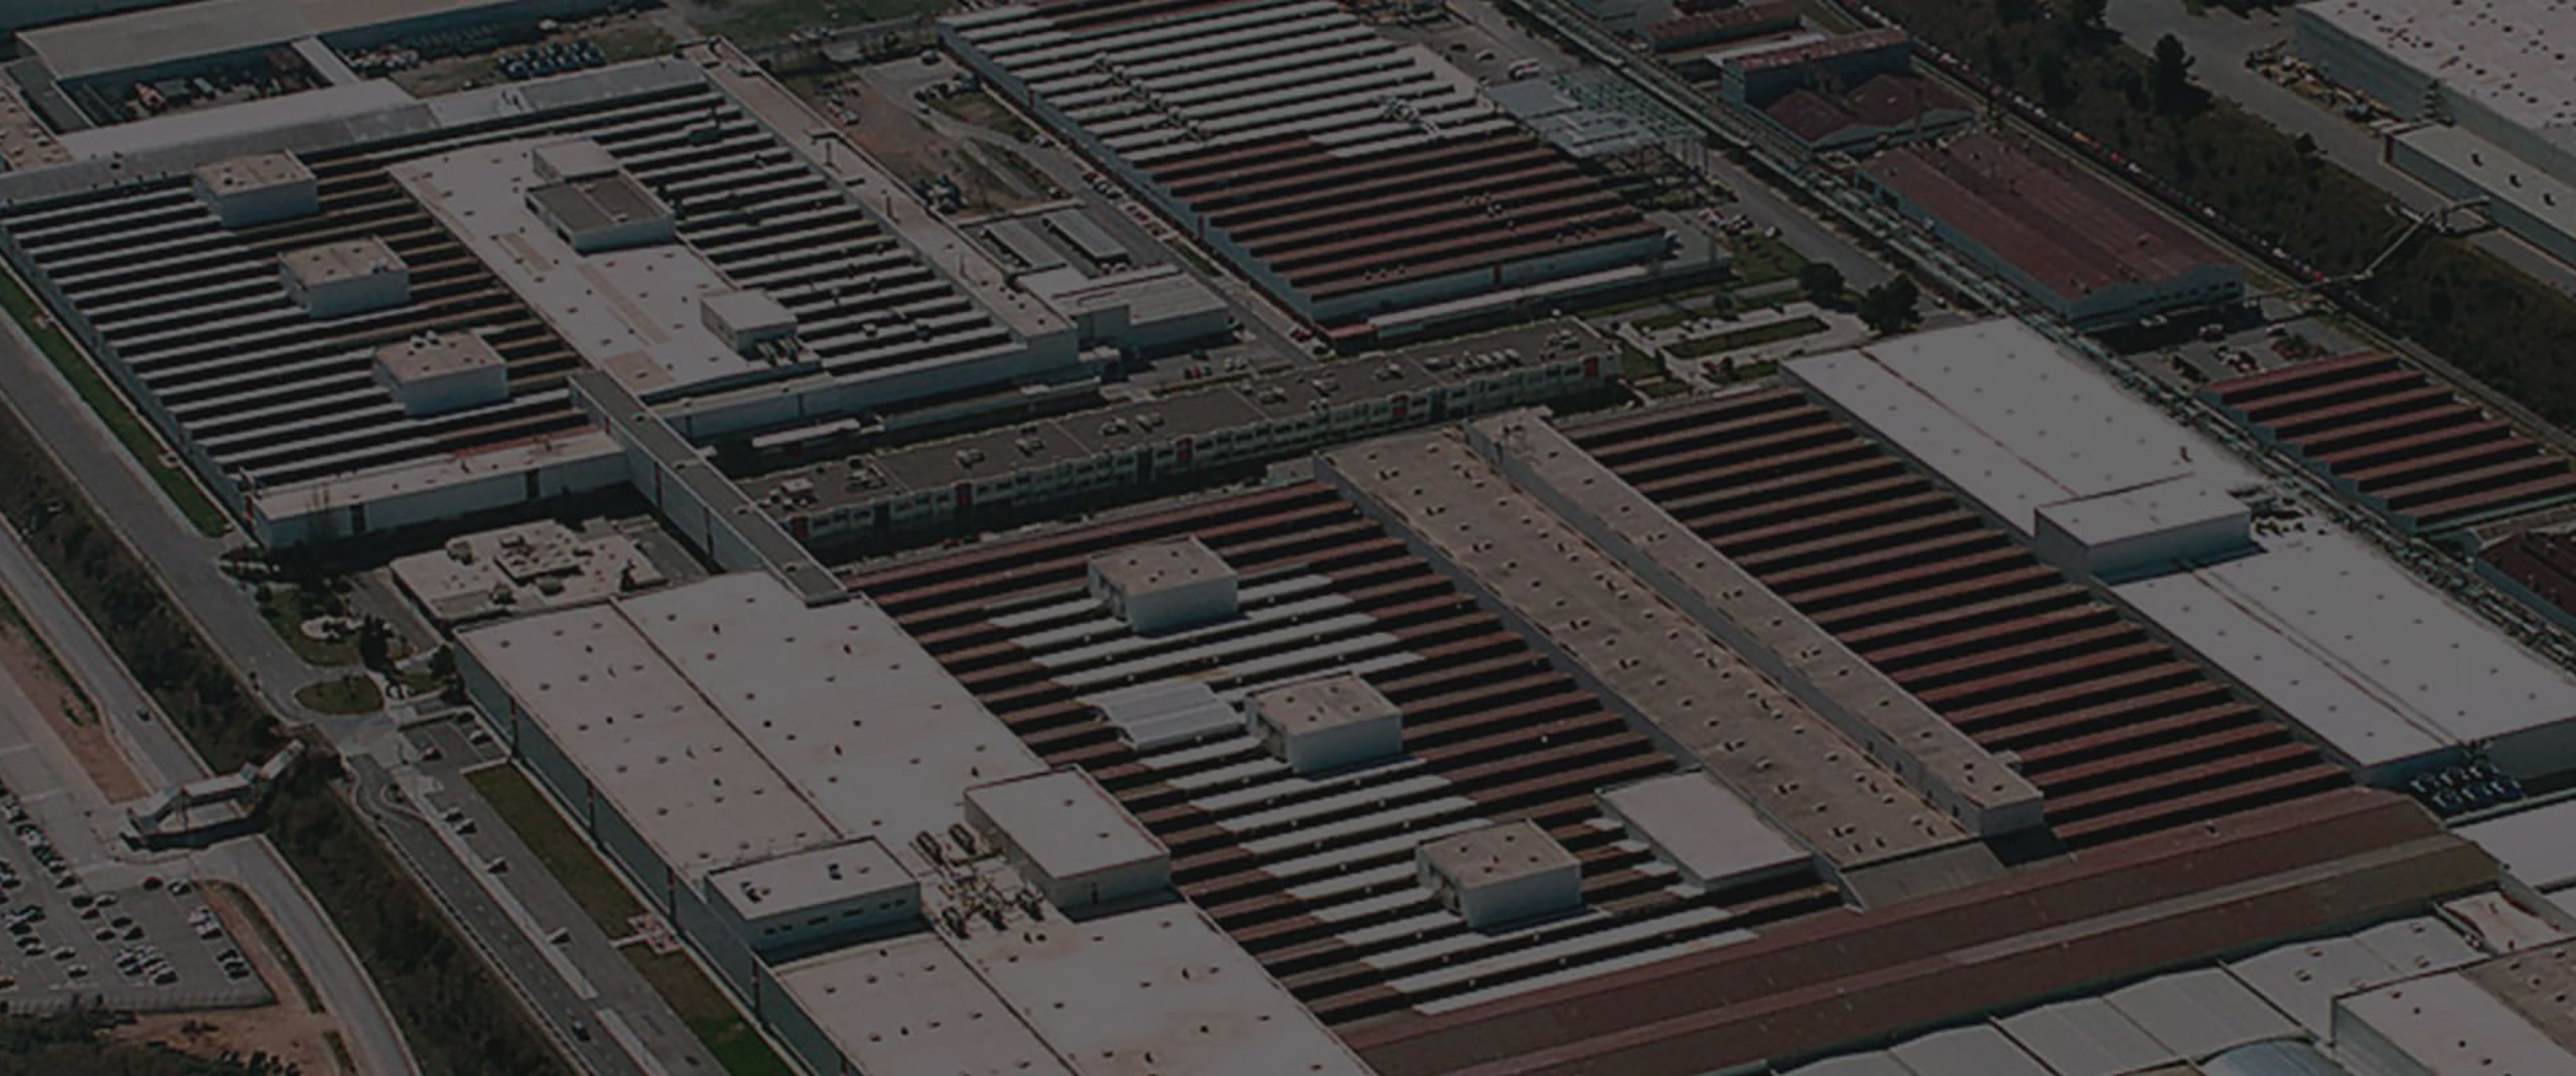 Picture of a large industrial site